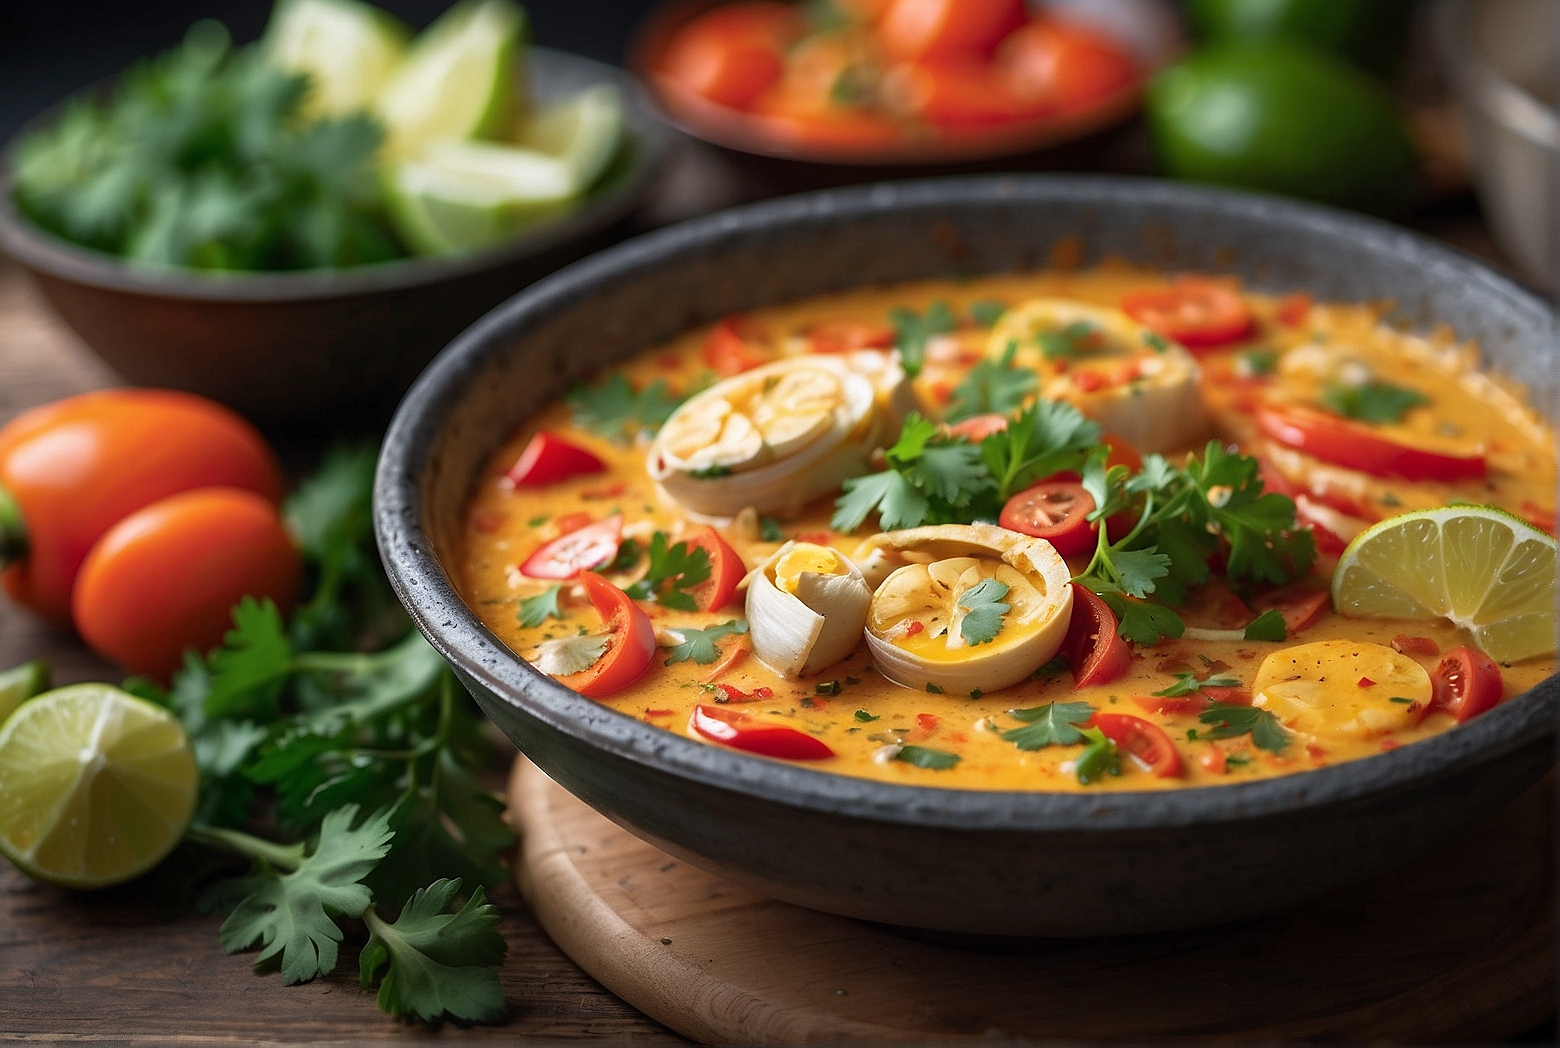 Step-by-Step Guide to Eating Moqueca